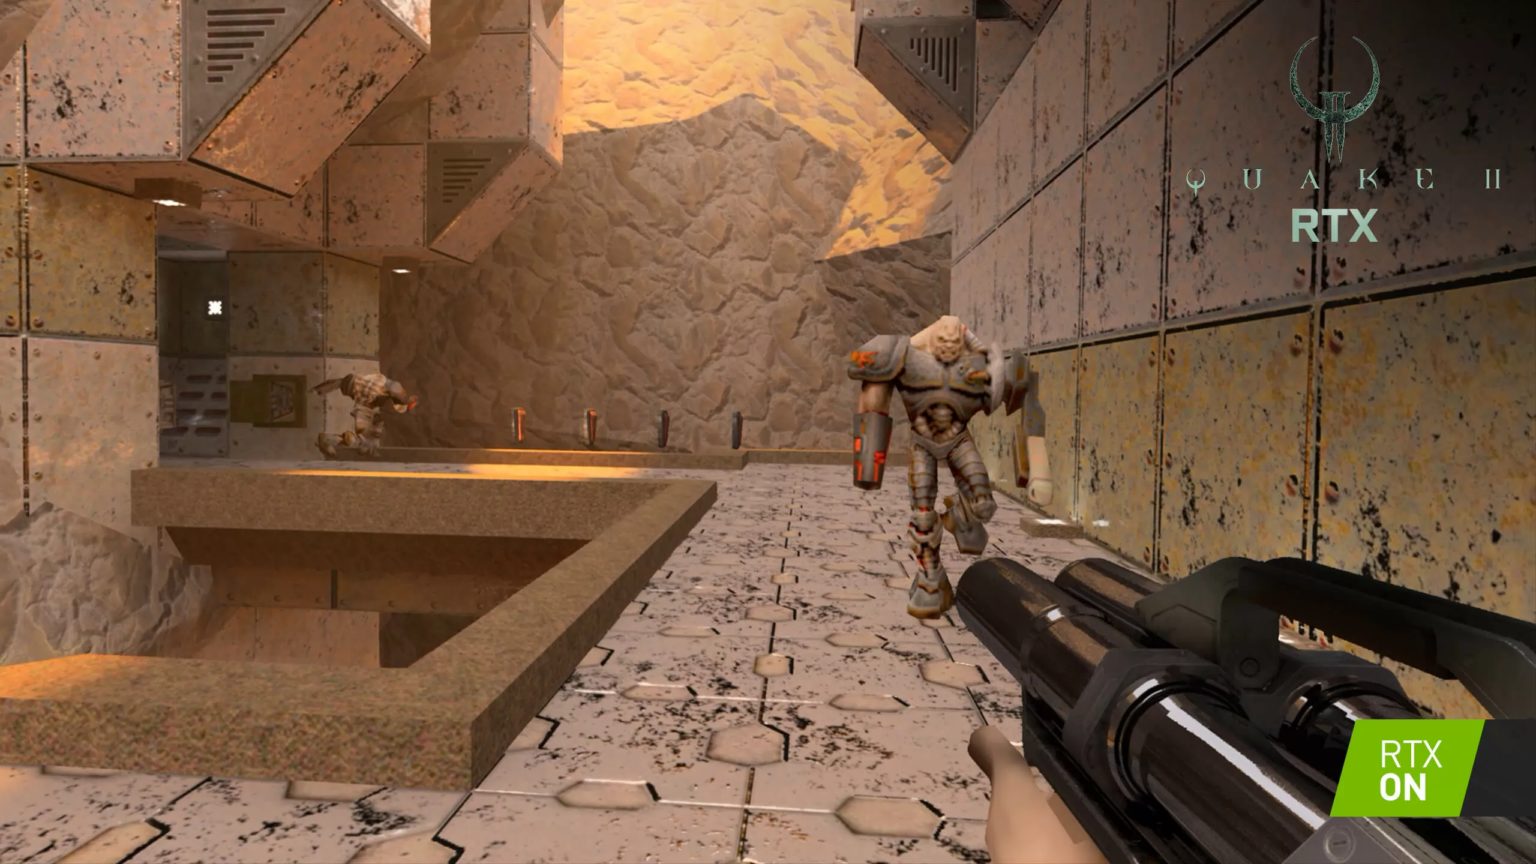 Developer manages to run ray tracing without a GPU, achieves 1 fps on Quake II RTX